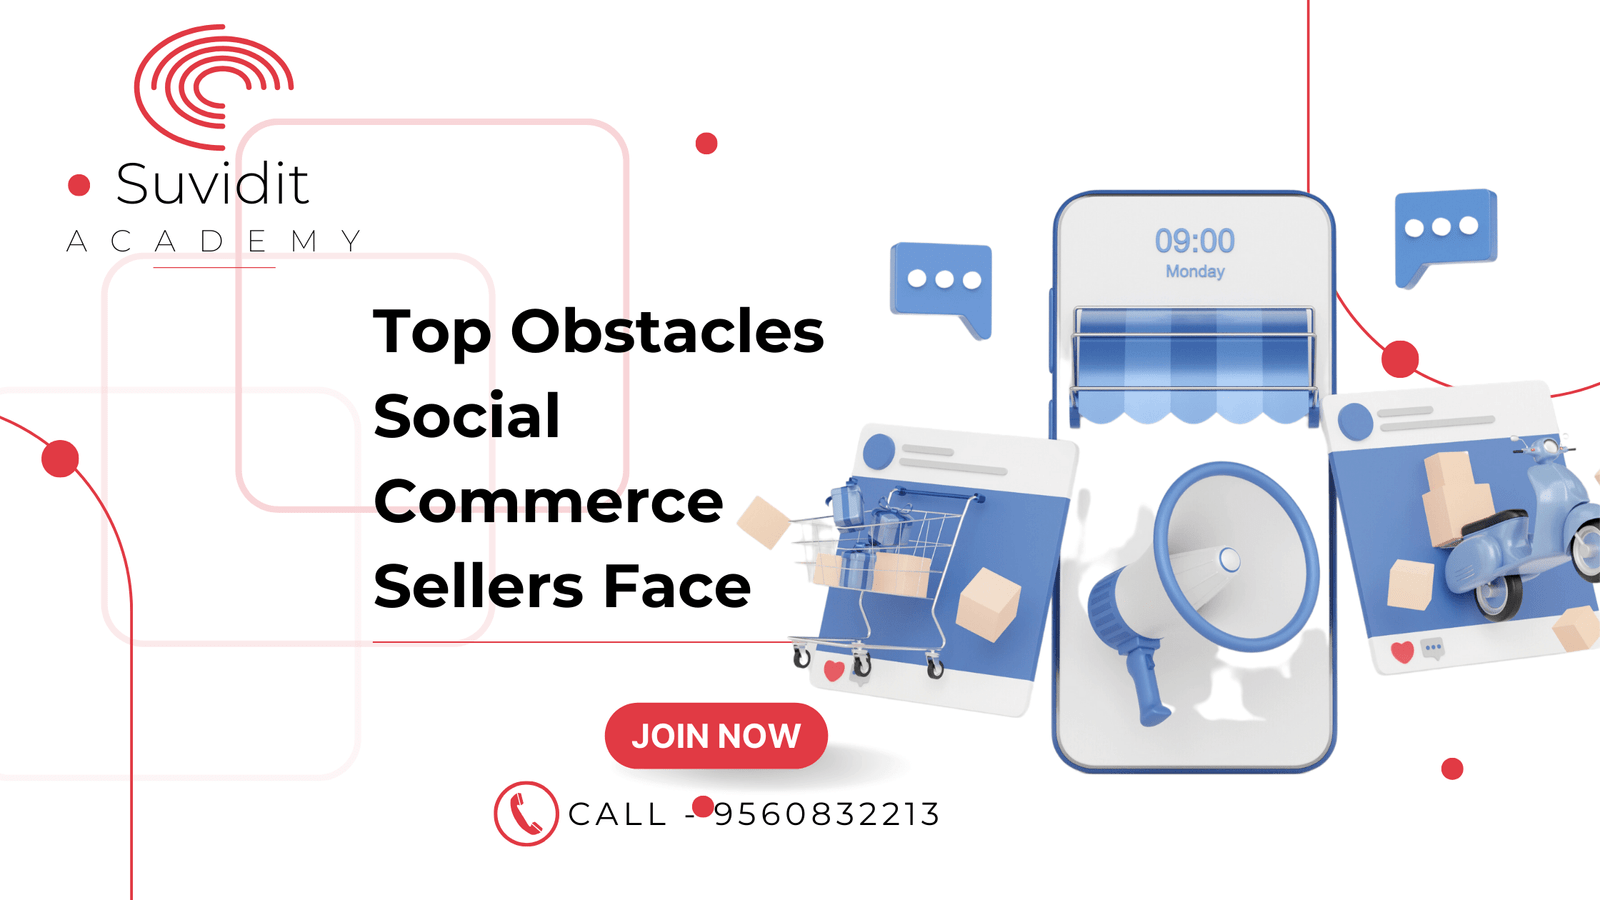 Top Obstacles Social Commerce Sellers Face